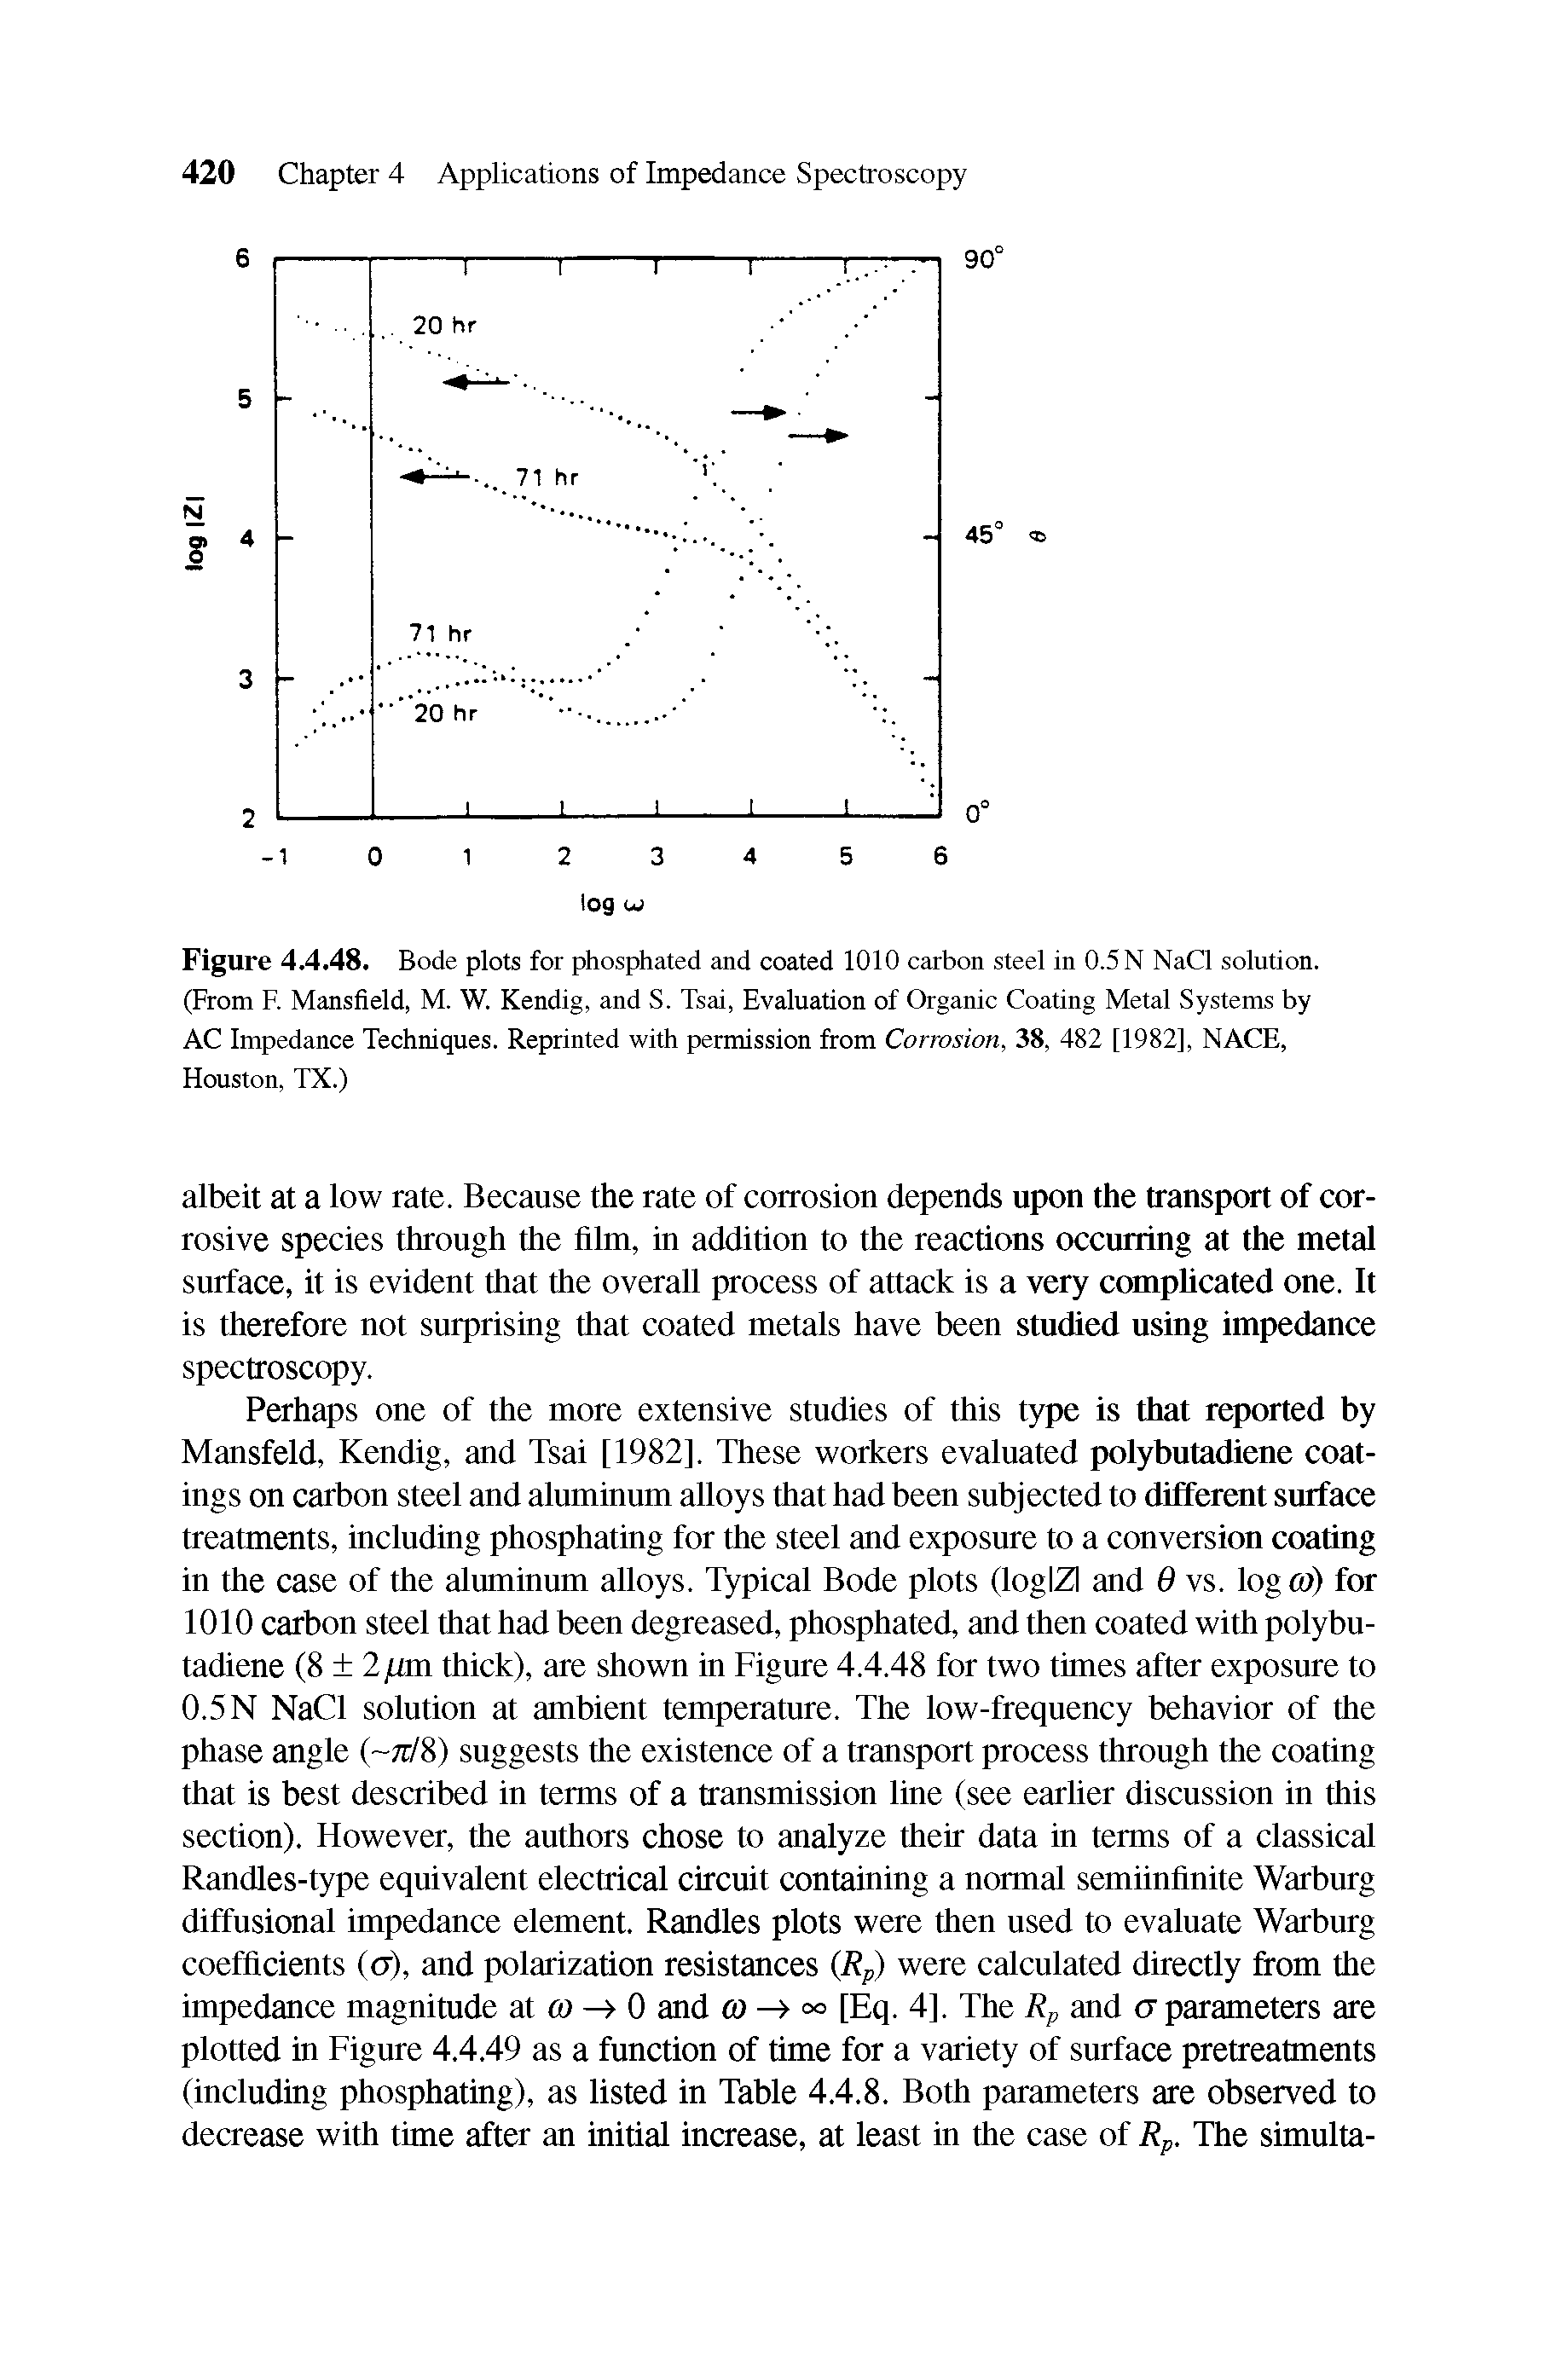 Figure 4.4.48. Bode plots for phosphated and coated 1010 carbon steel in 0.5 N NaCl solution. (From F. Mansfield, M. W. Kendig, and S. Tsai, Evaluation of Organic Coating Metal Systems by AC Impedance Techniques. Reprinted with permission from Corrosion, 38, 482 [1982], NACE, Houston, TX.)...